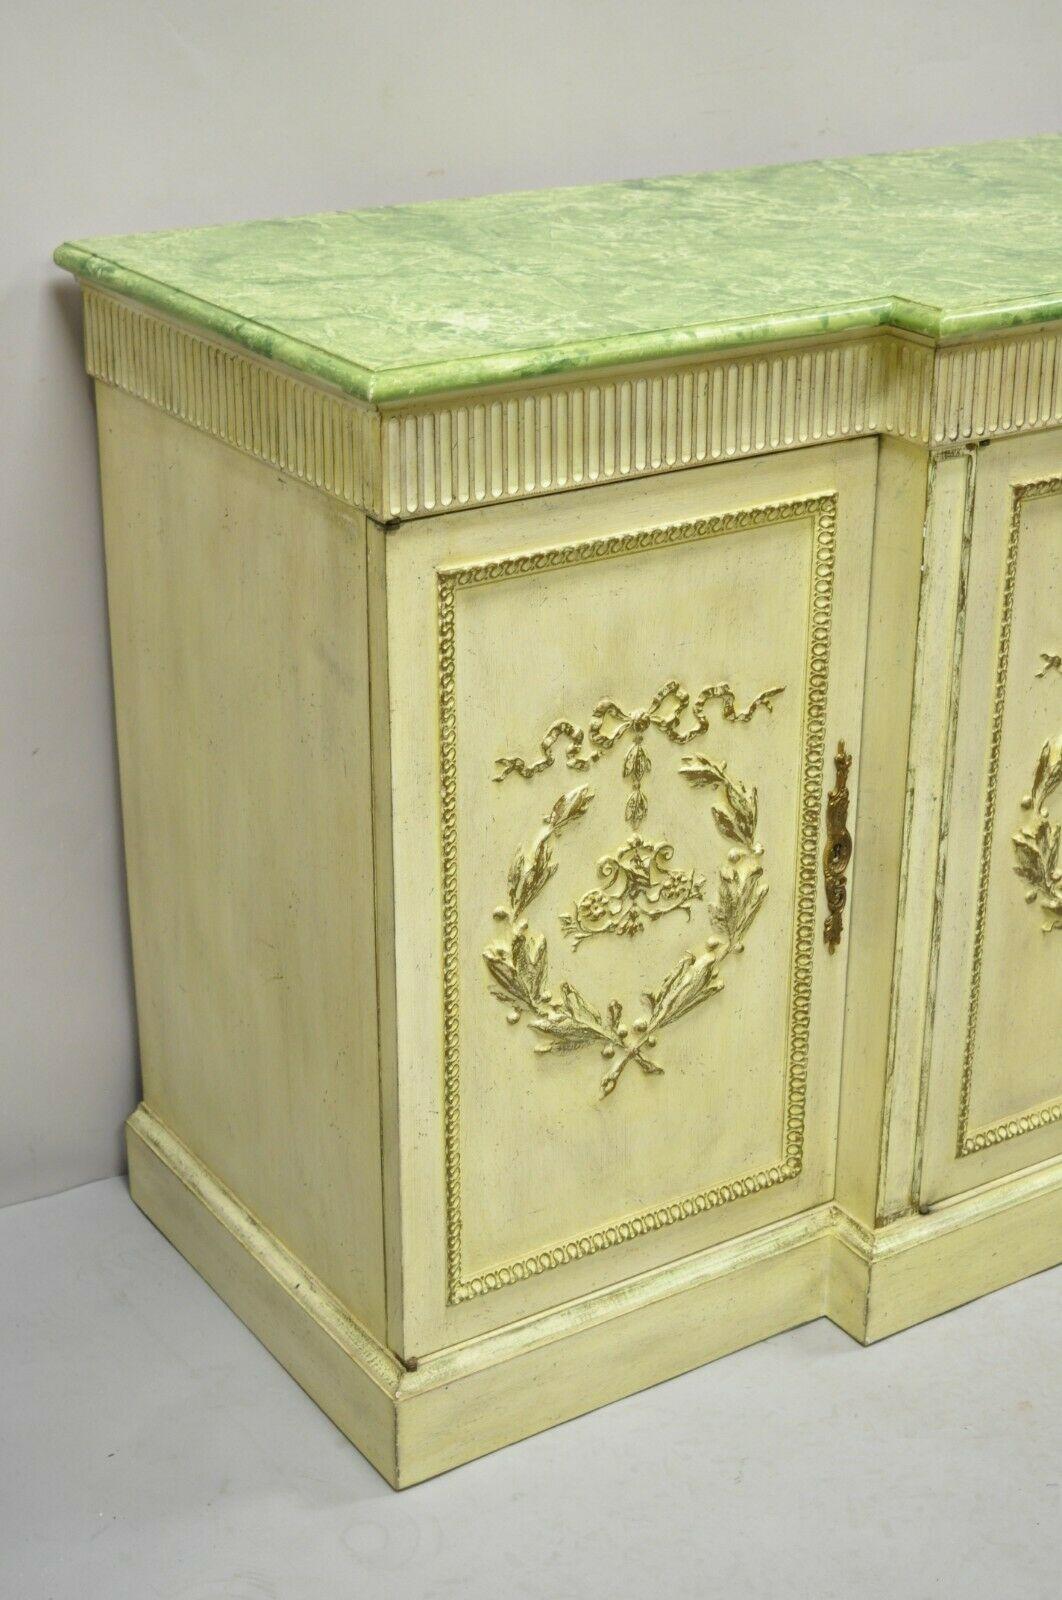 Vintage Italian Neoclassical Buffet Sideboard Credenza Green Faux Marble Top In Good Condition For Sale In Philadelphia, PA